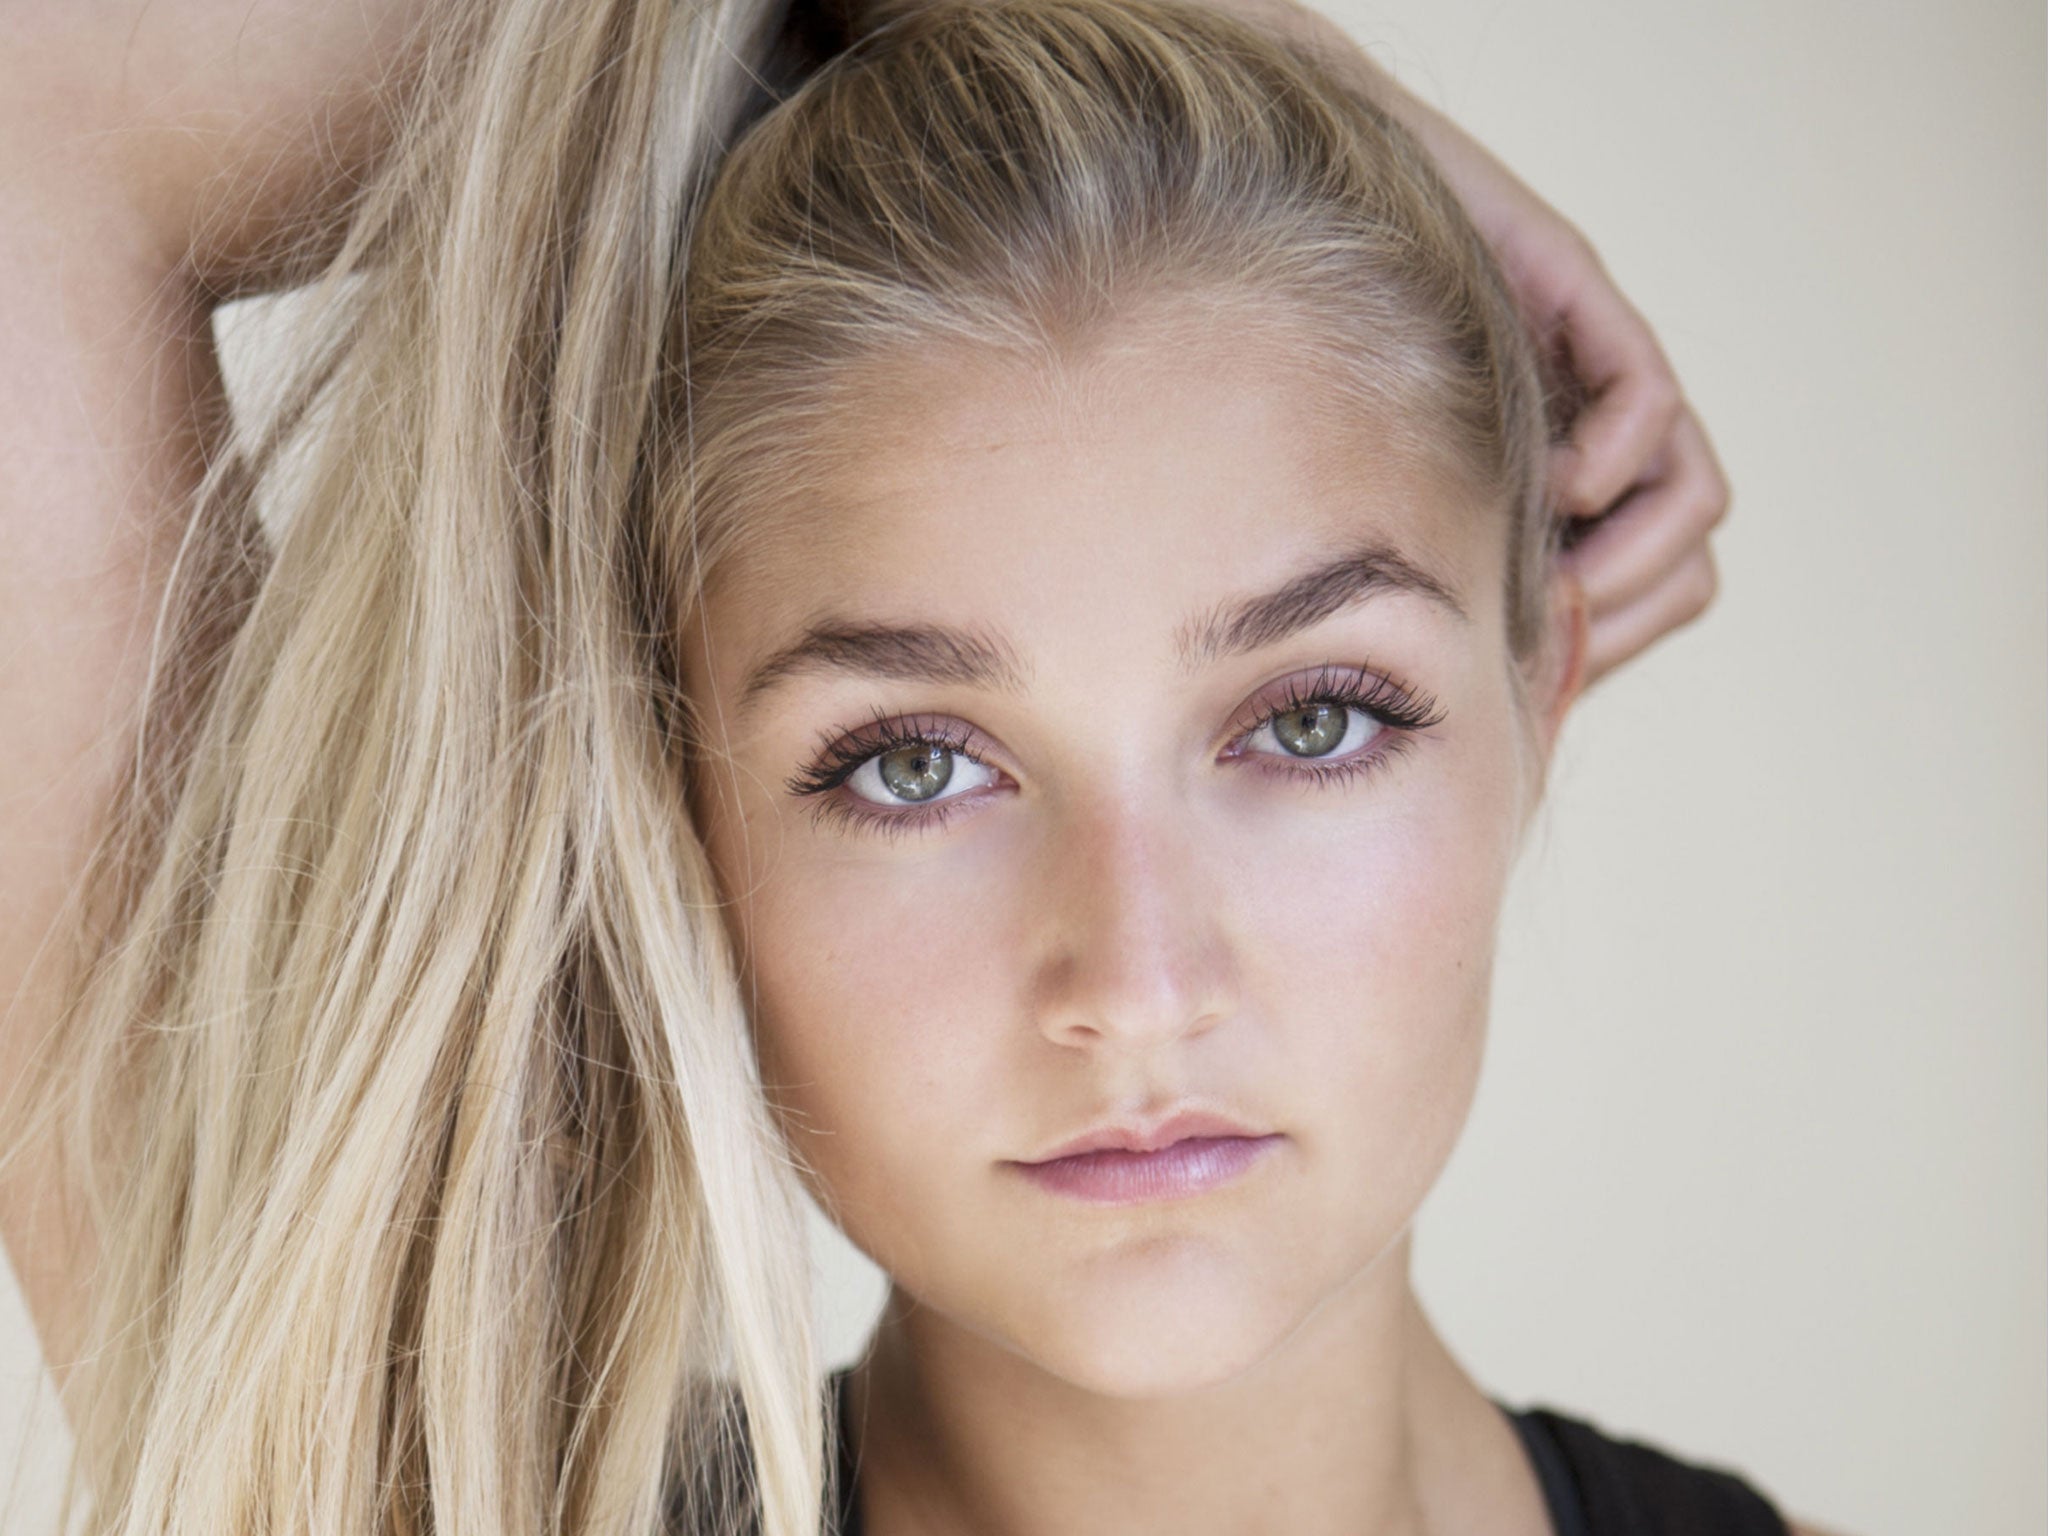 Louella Michie, the daughter of former Coronation Street and Taggart star John Michie, who died after a drug overdose at Bestival in 2017